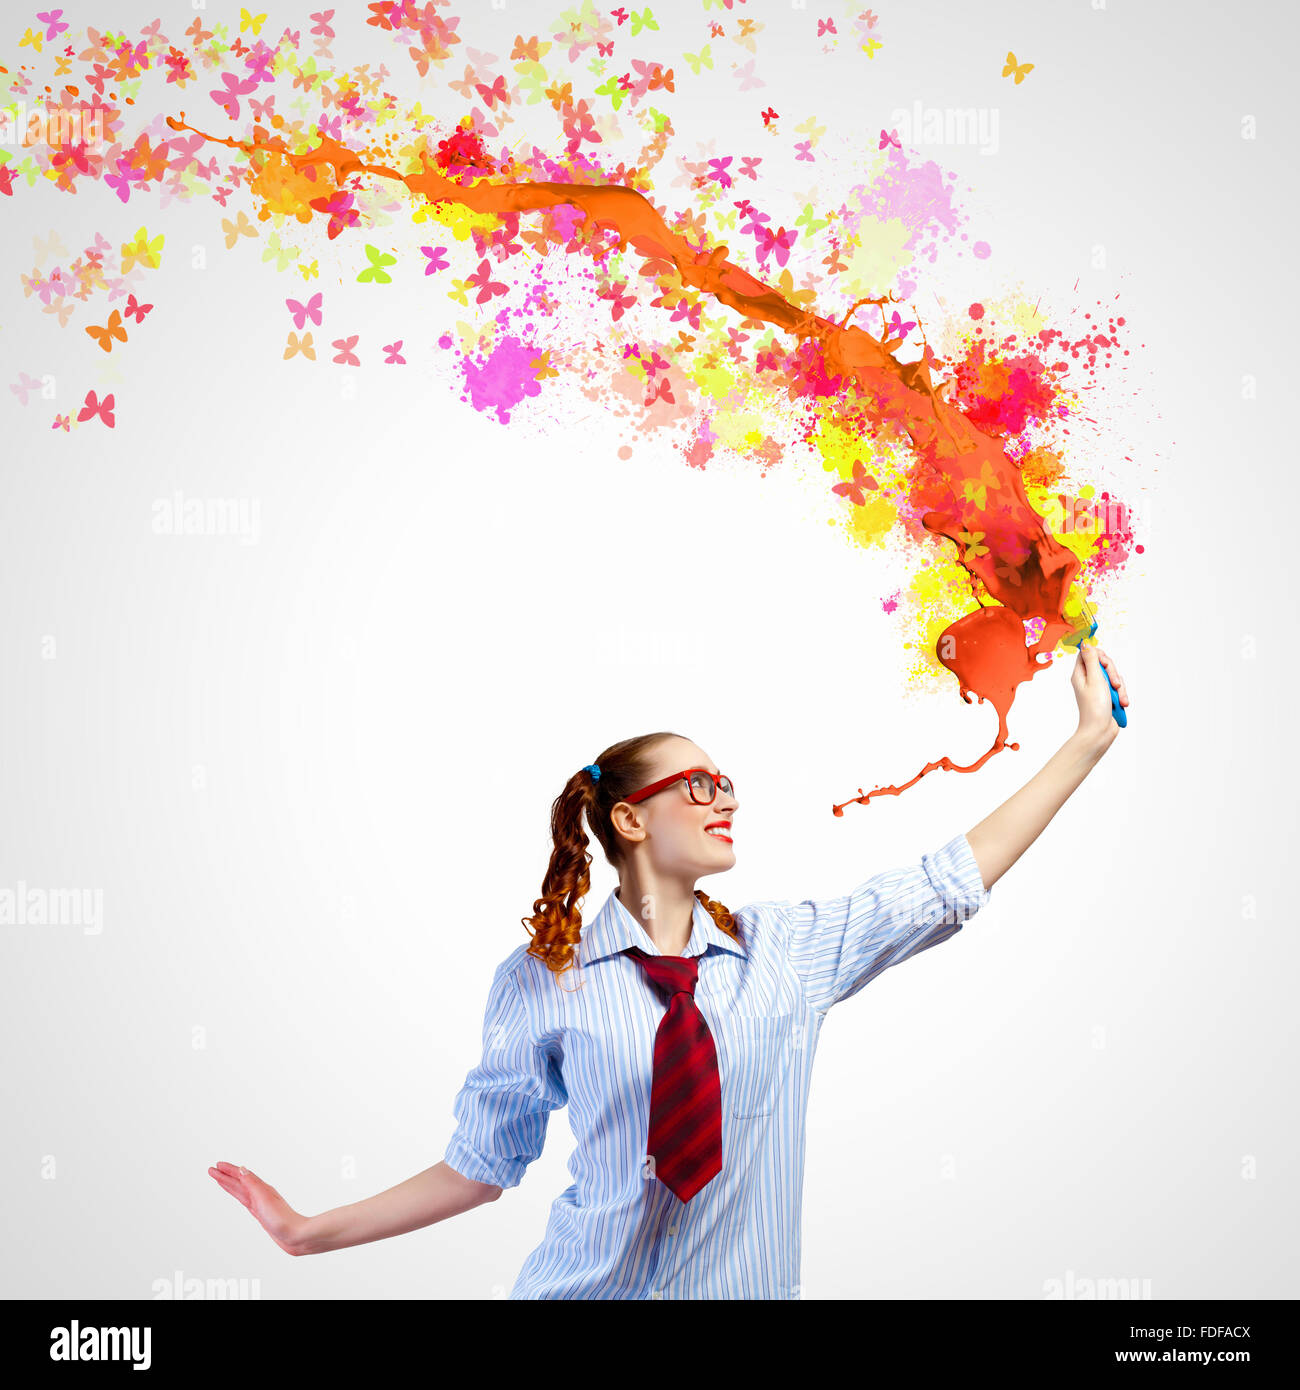 Image of young woman painter with brush Stock Photo